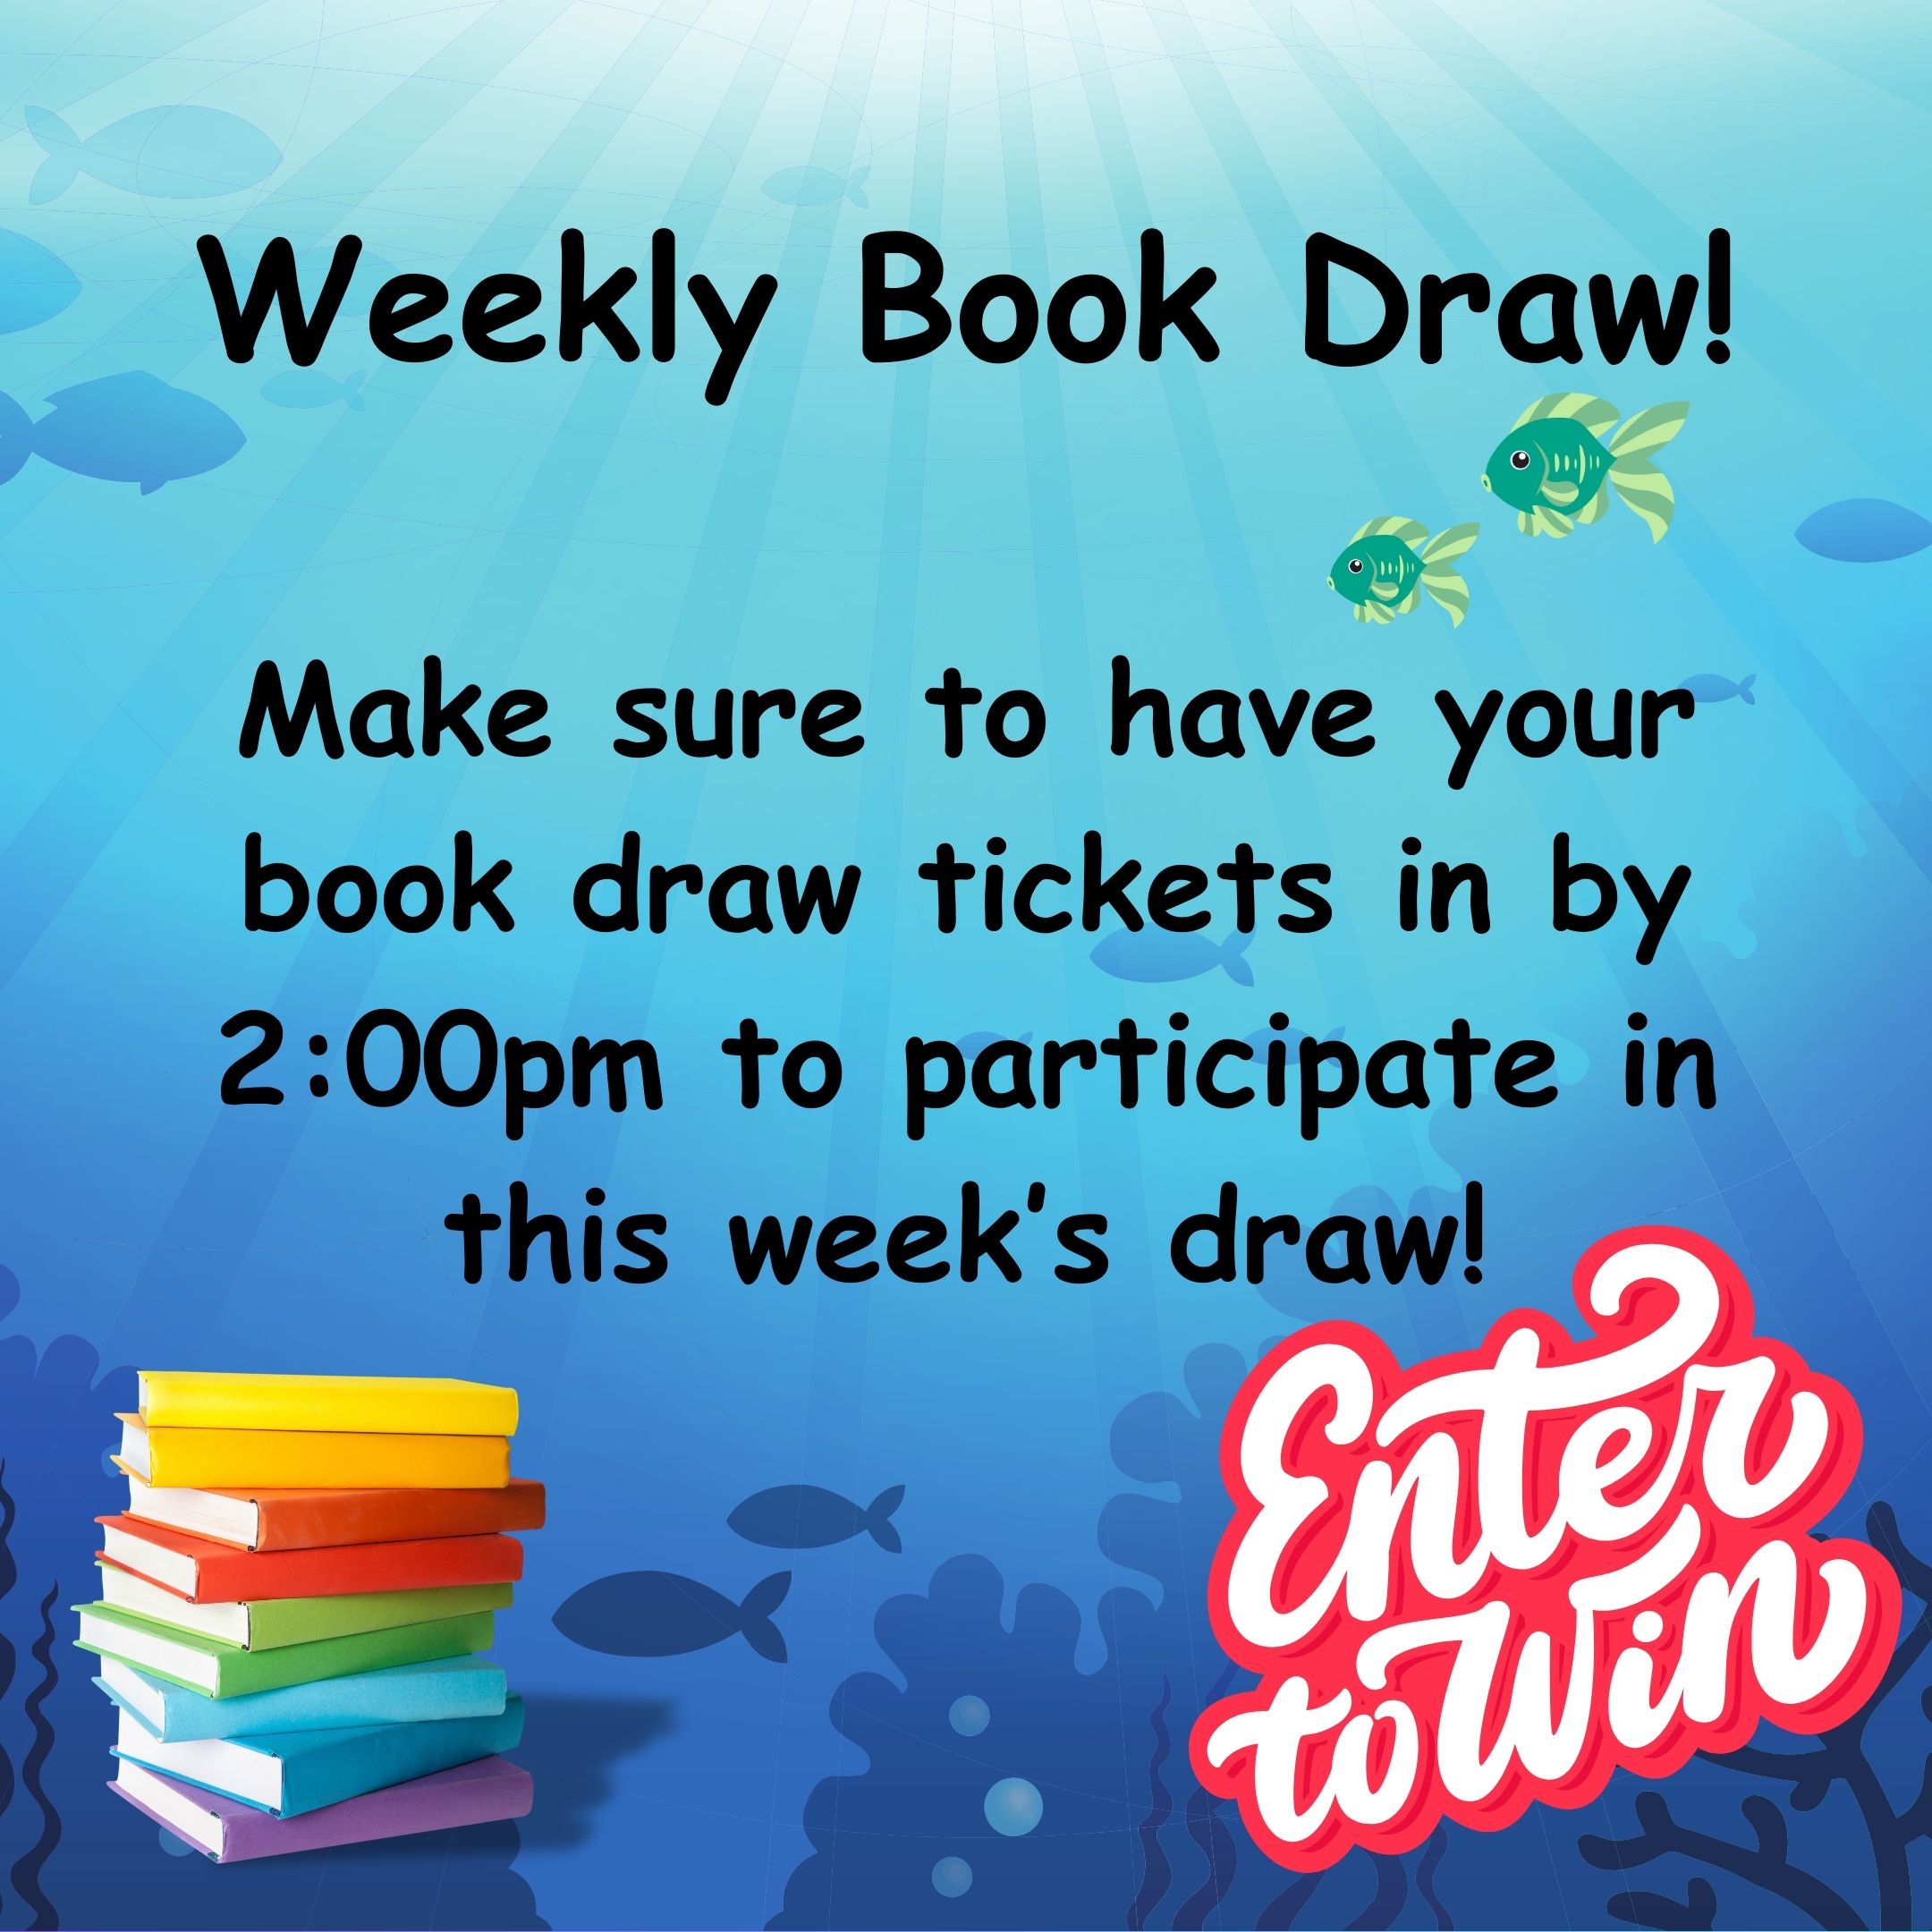 Make sure to stop into the Altona branch before 2pm to participate in that weeks draws!